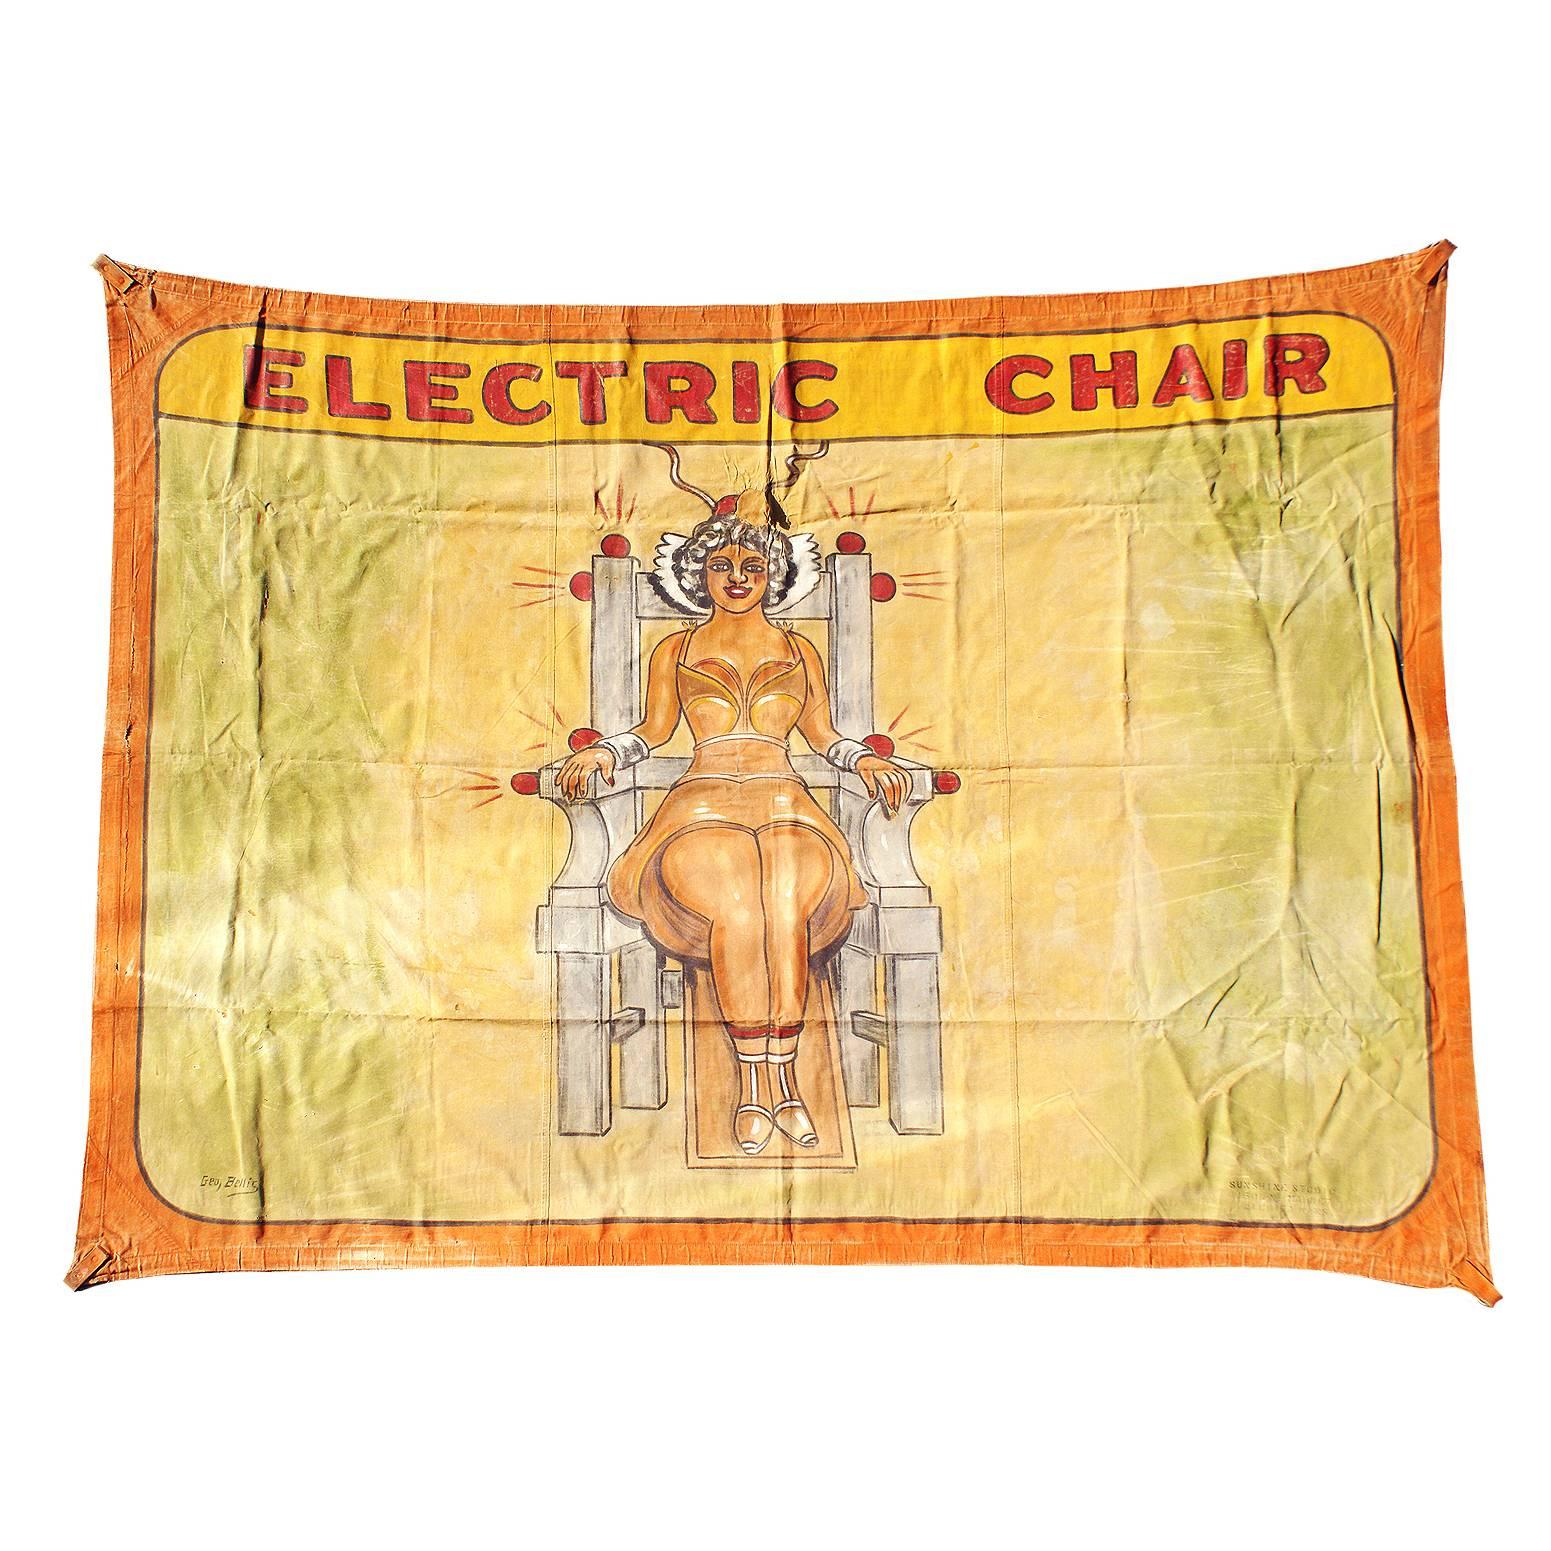 Early Sunshine Studios American Side Show Electric Chair Banner